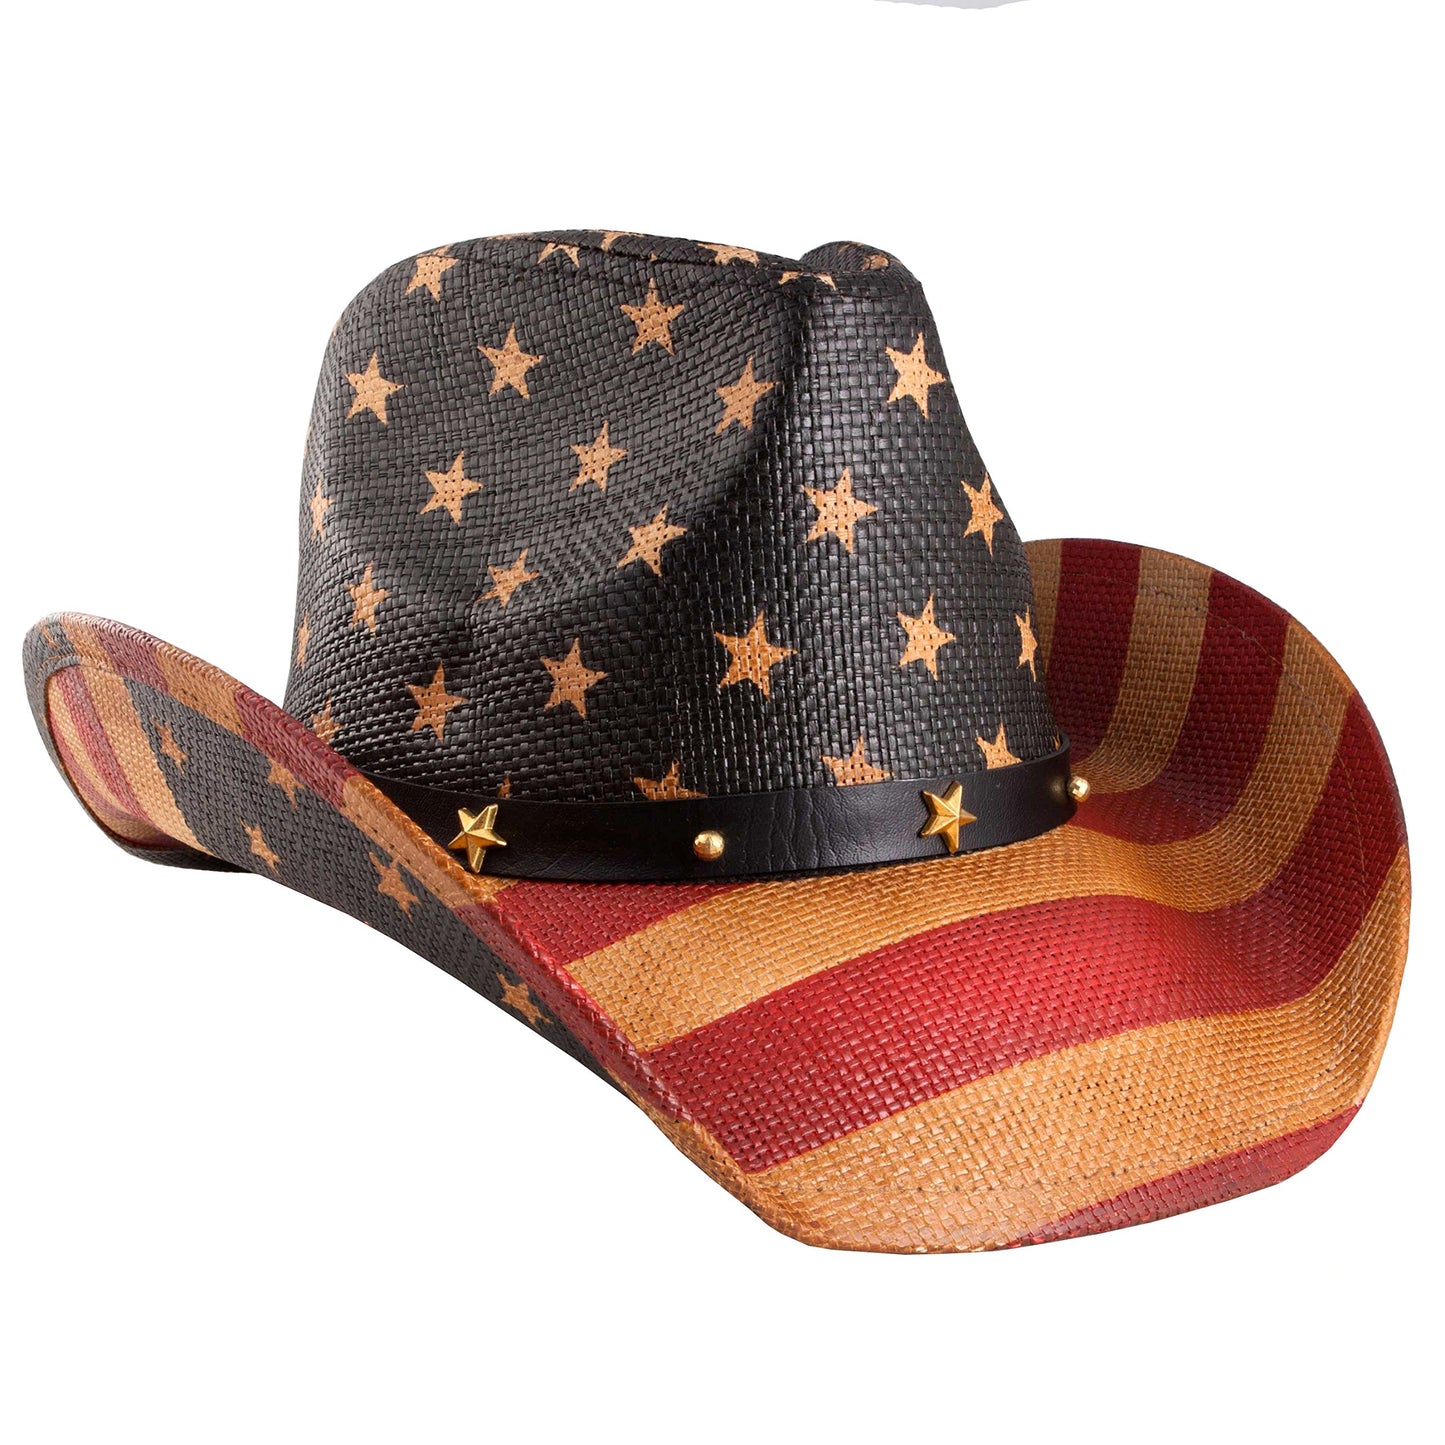 grinderPUNCH Western Outback Cowboy Hat Men's Women's Style Classic Straw Western Cowgirl Hat